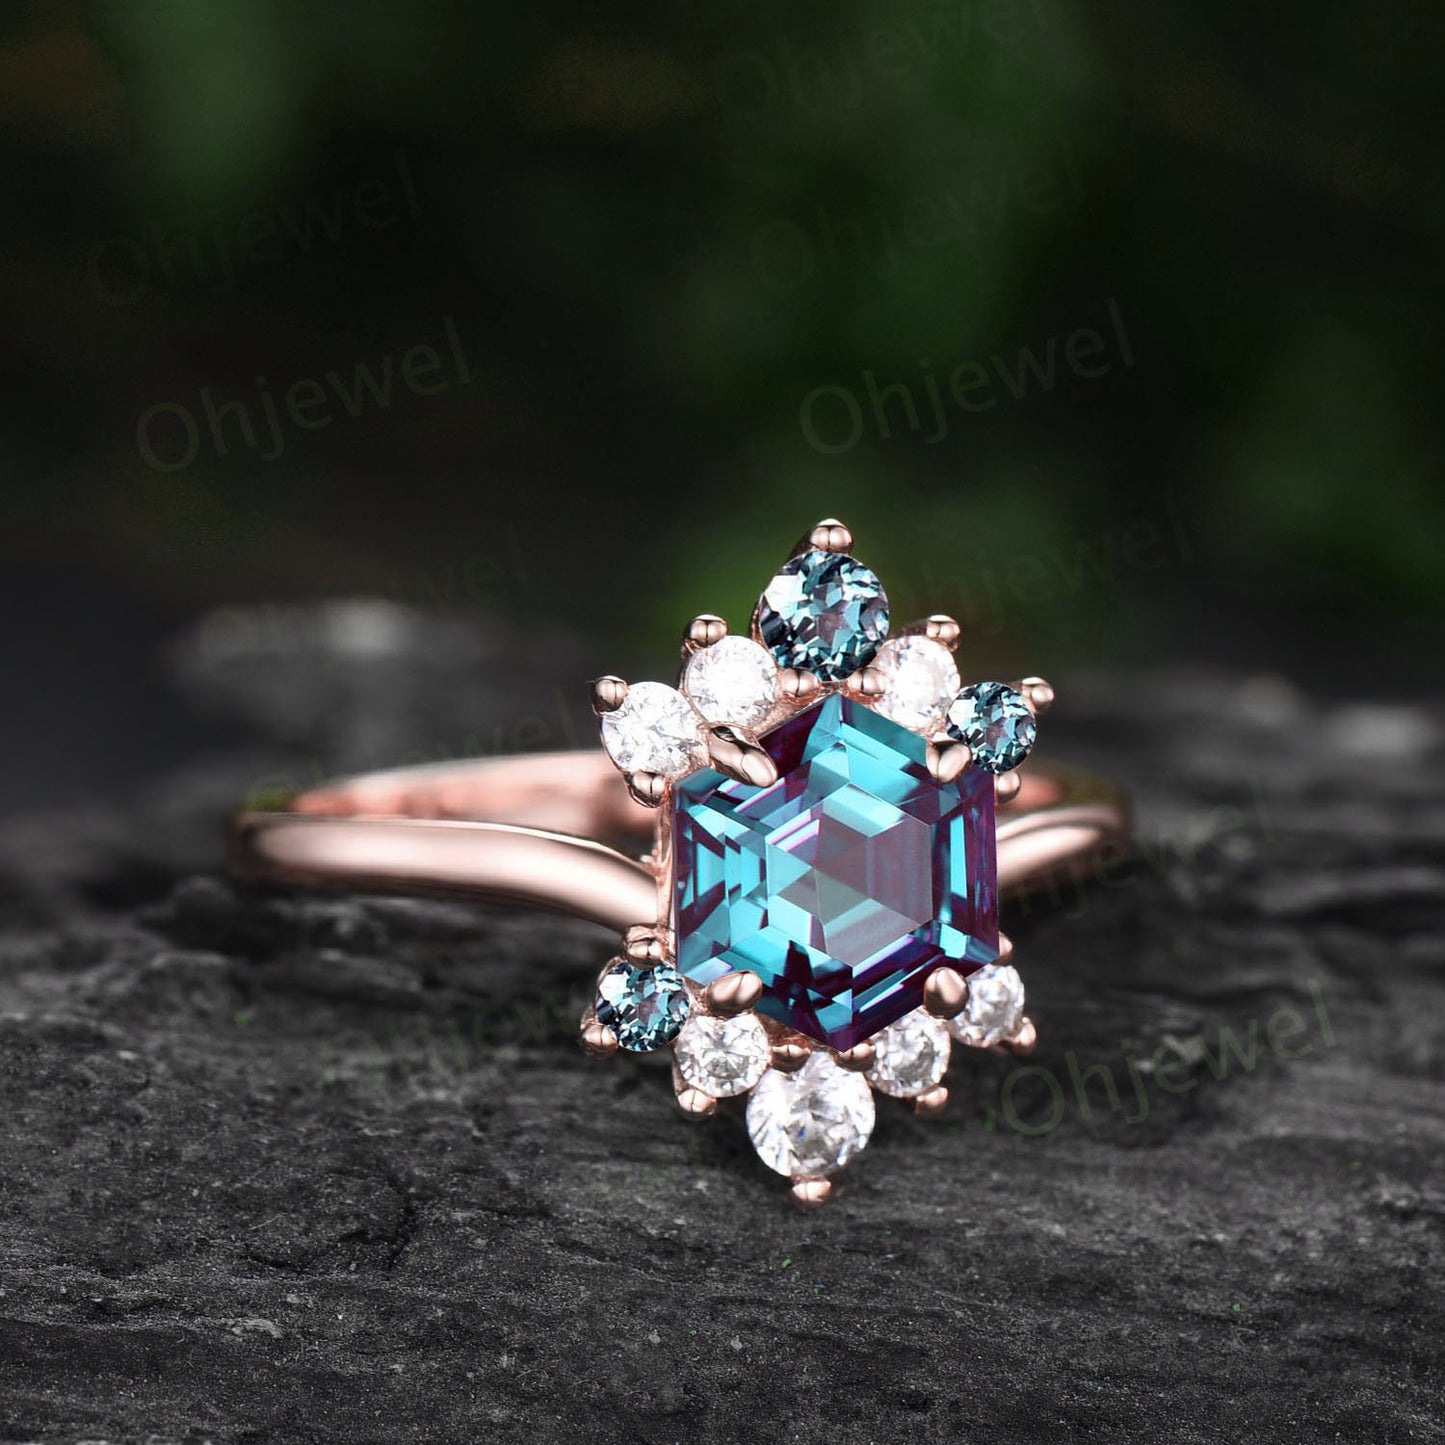 7mm Hexagon cut alexandrite ring rose gold vintage unique engagement ring for women unique diamond ring cluster moissanite promise ring her